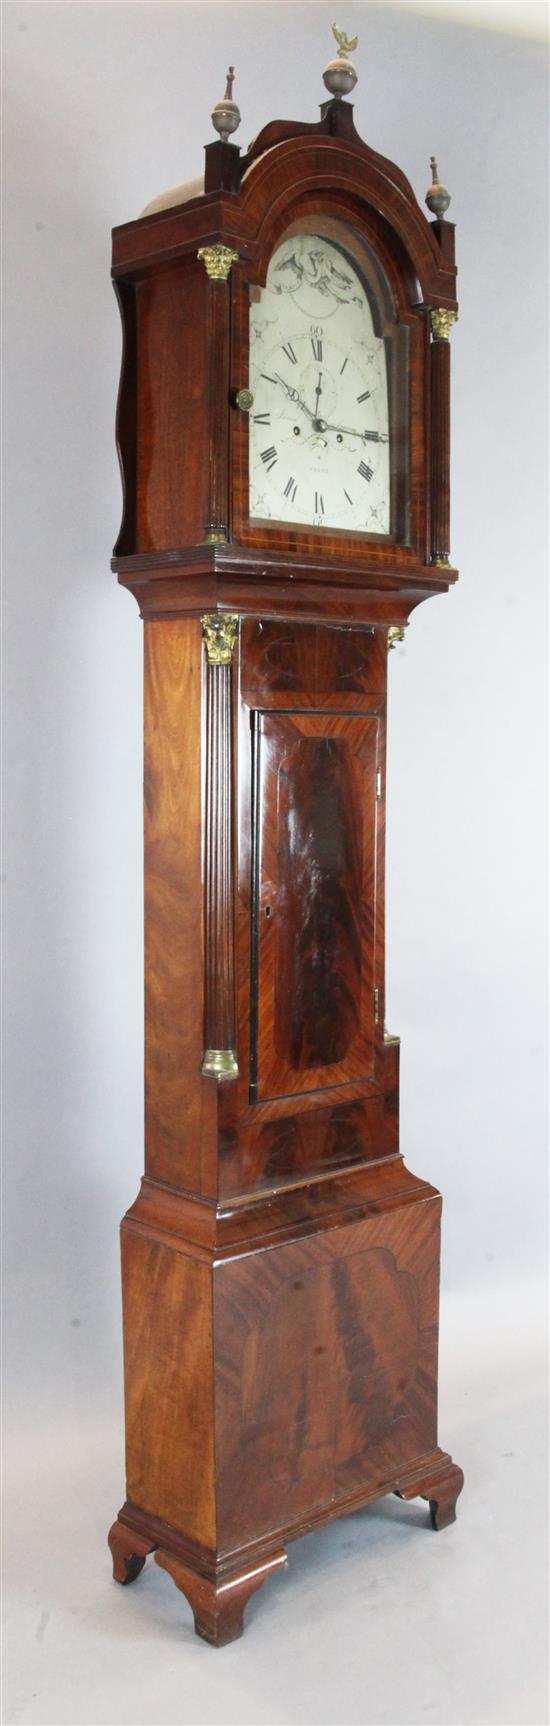 James Spencer of Colne. A George III mahogany eight day longcase clock, H.7ft 7in.